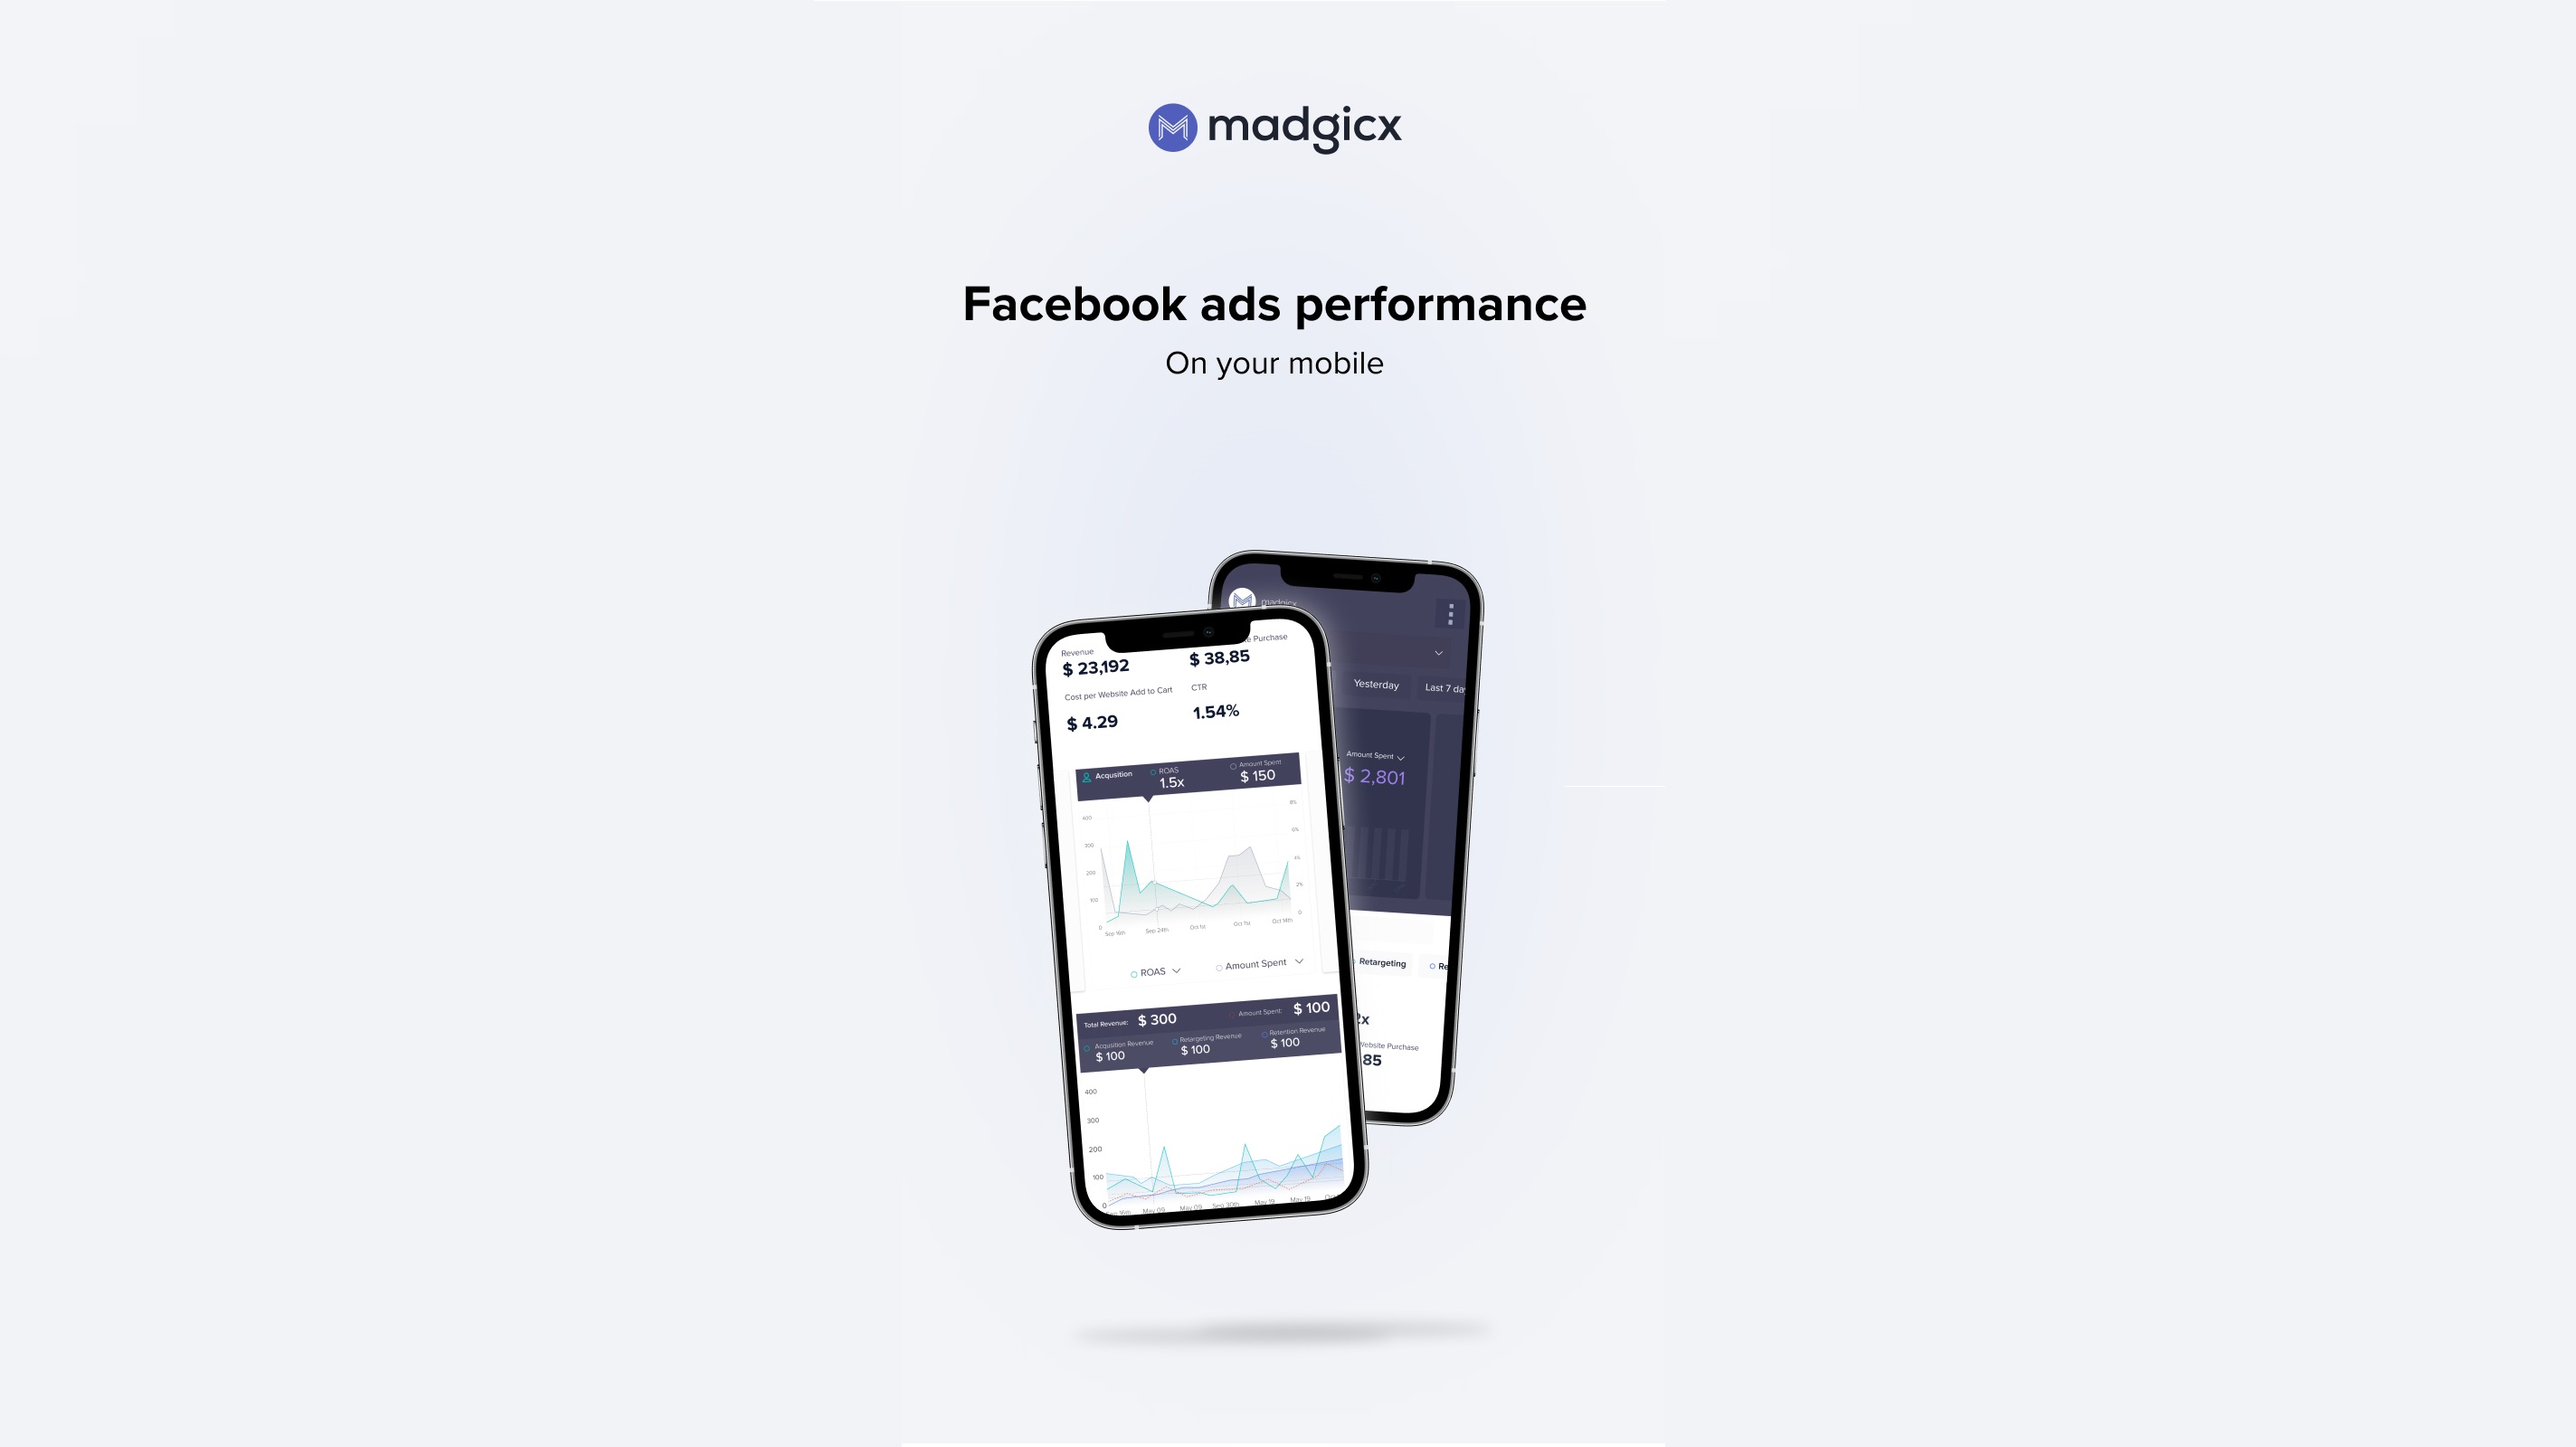 Know more about Madgicx